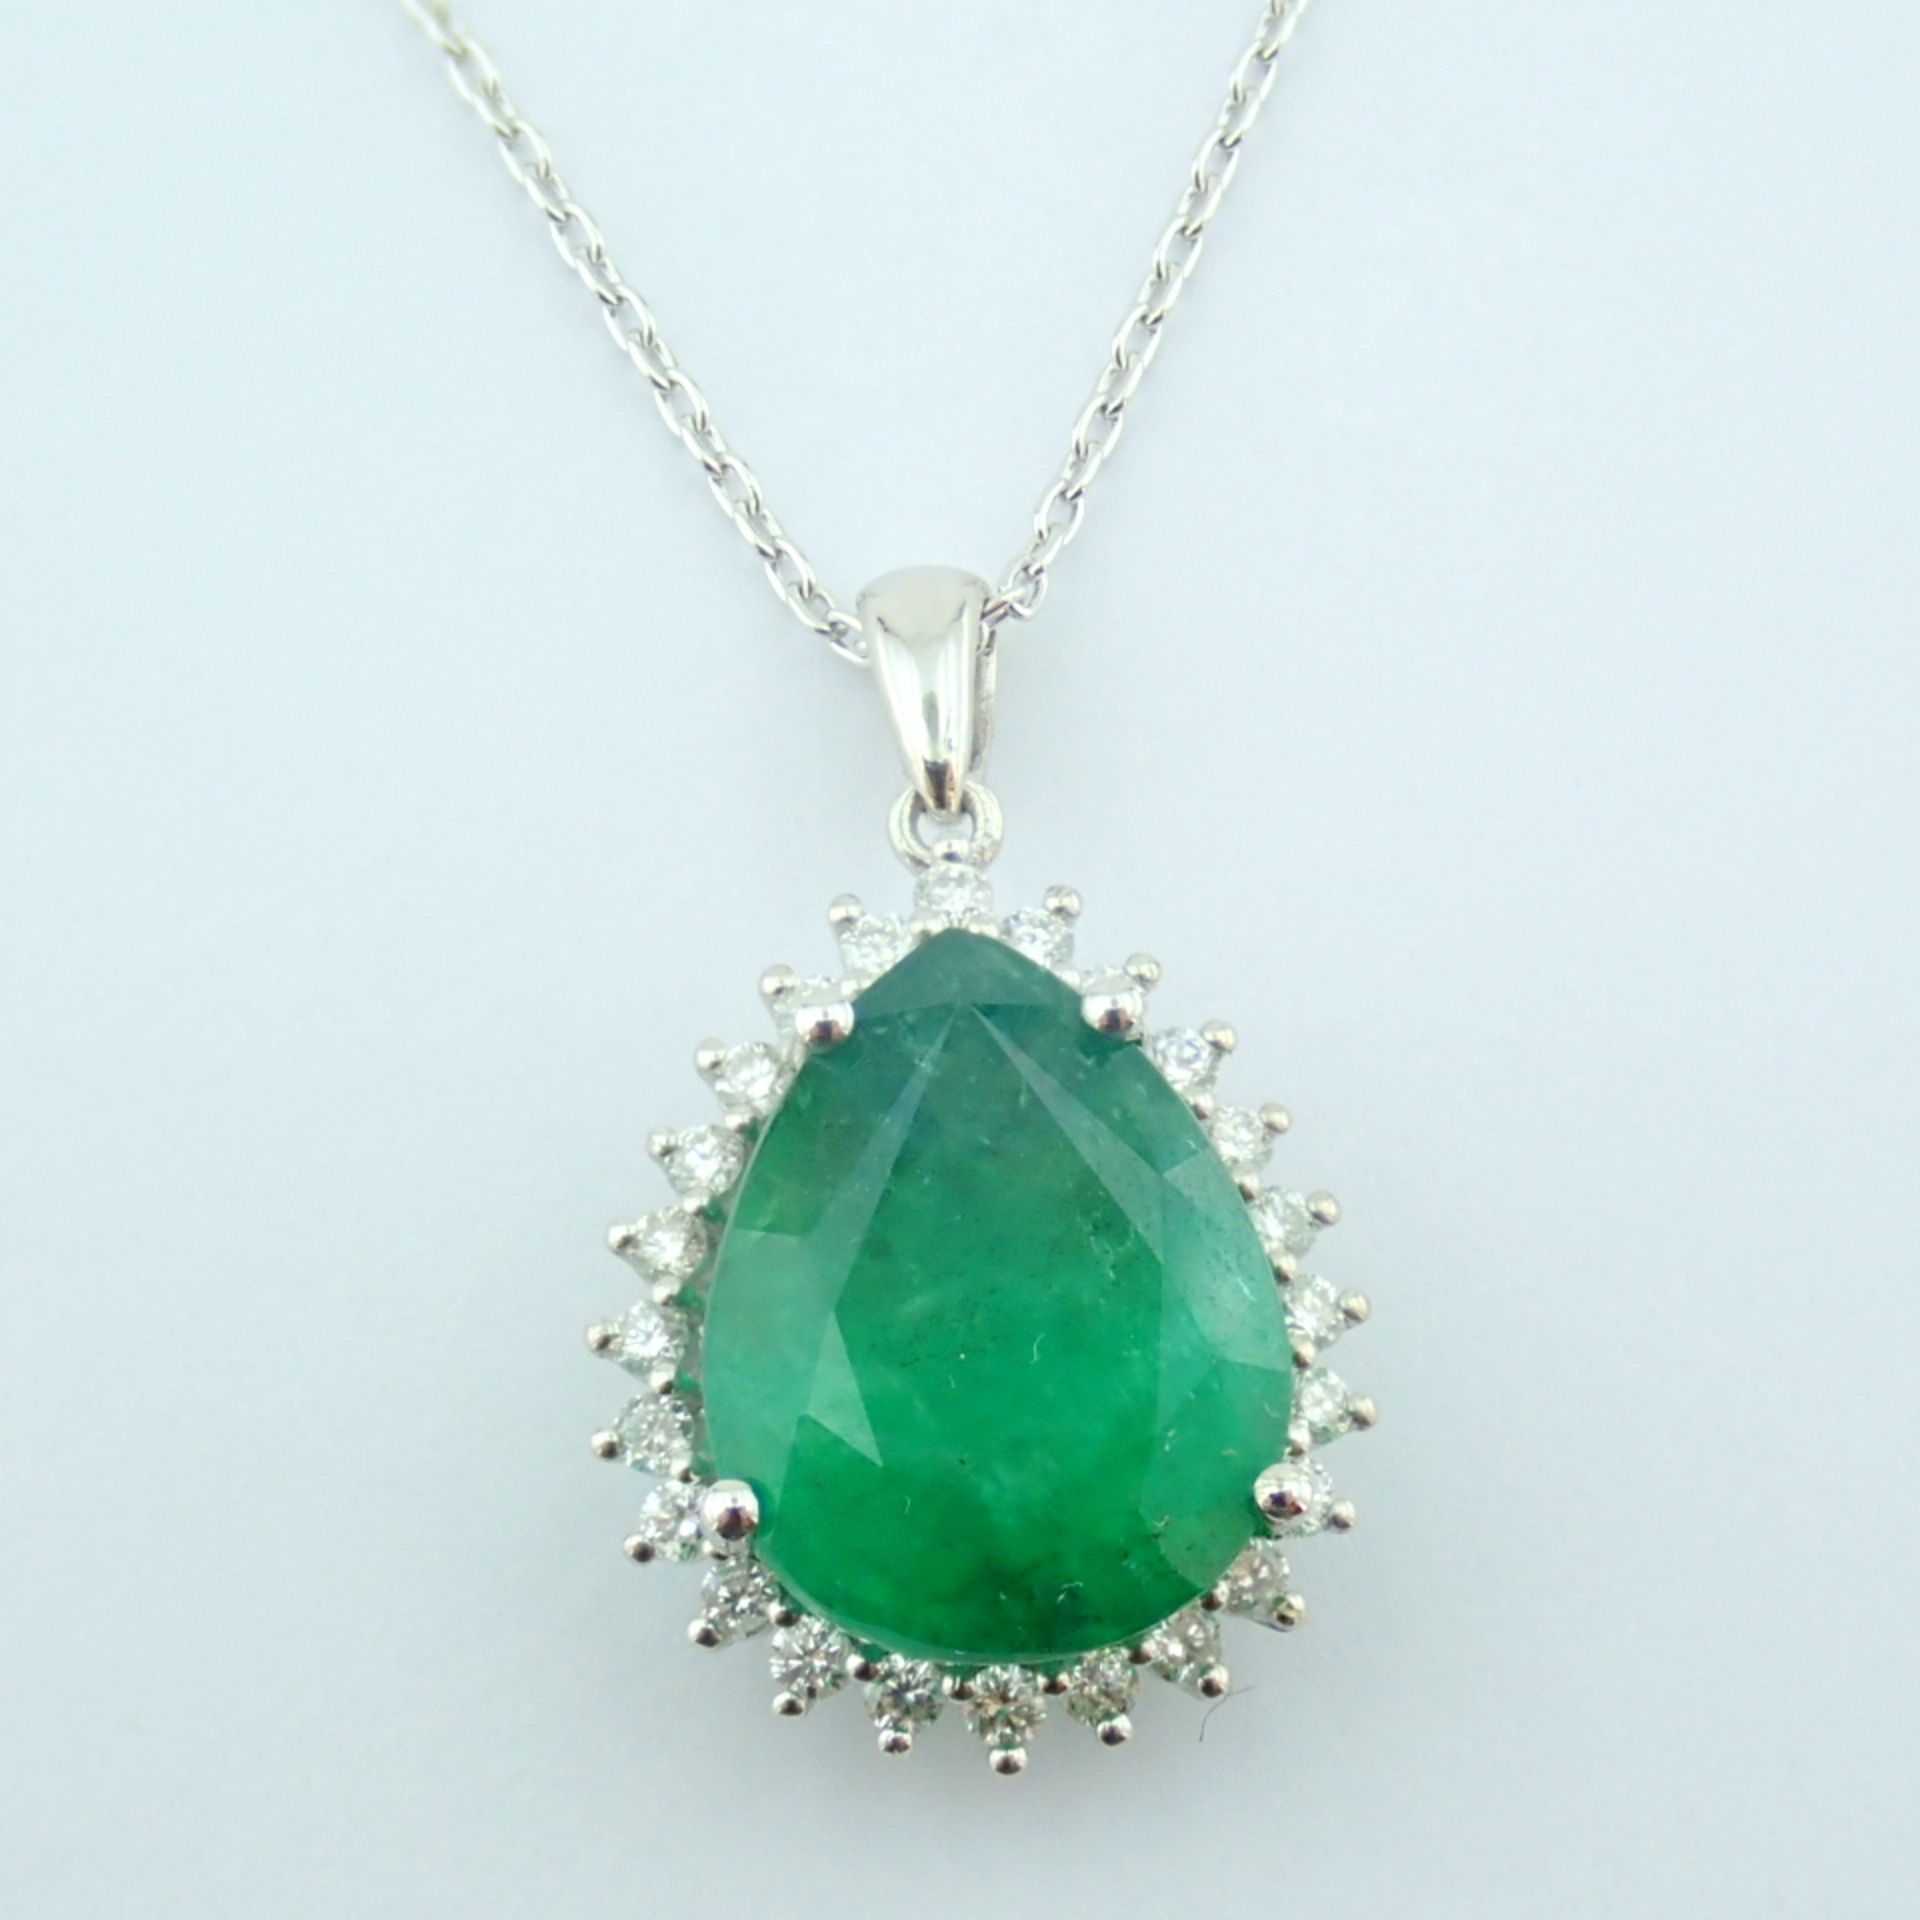 Certificated 14K White Gold Diamond & Emerald Necklace - Image 9 of 12